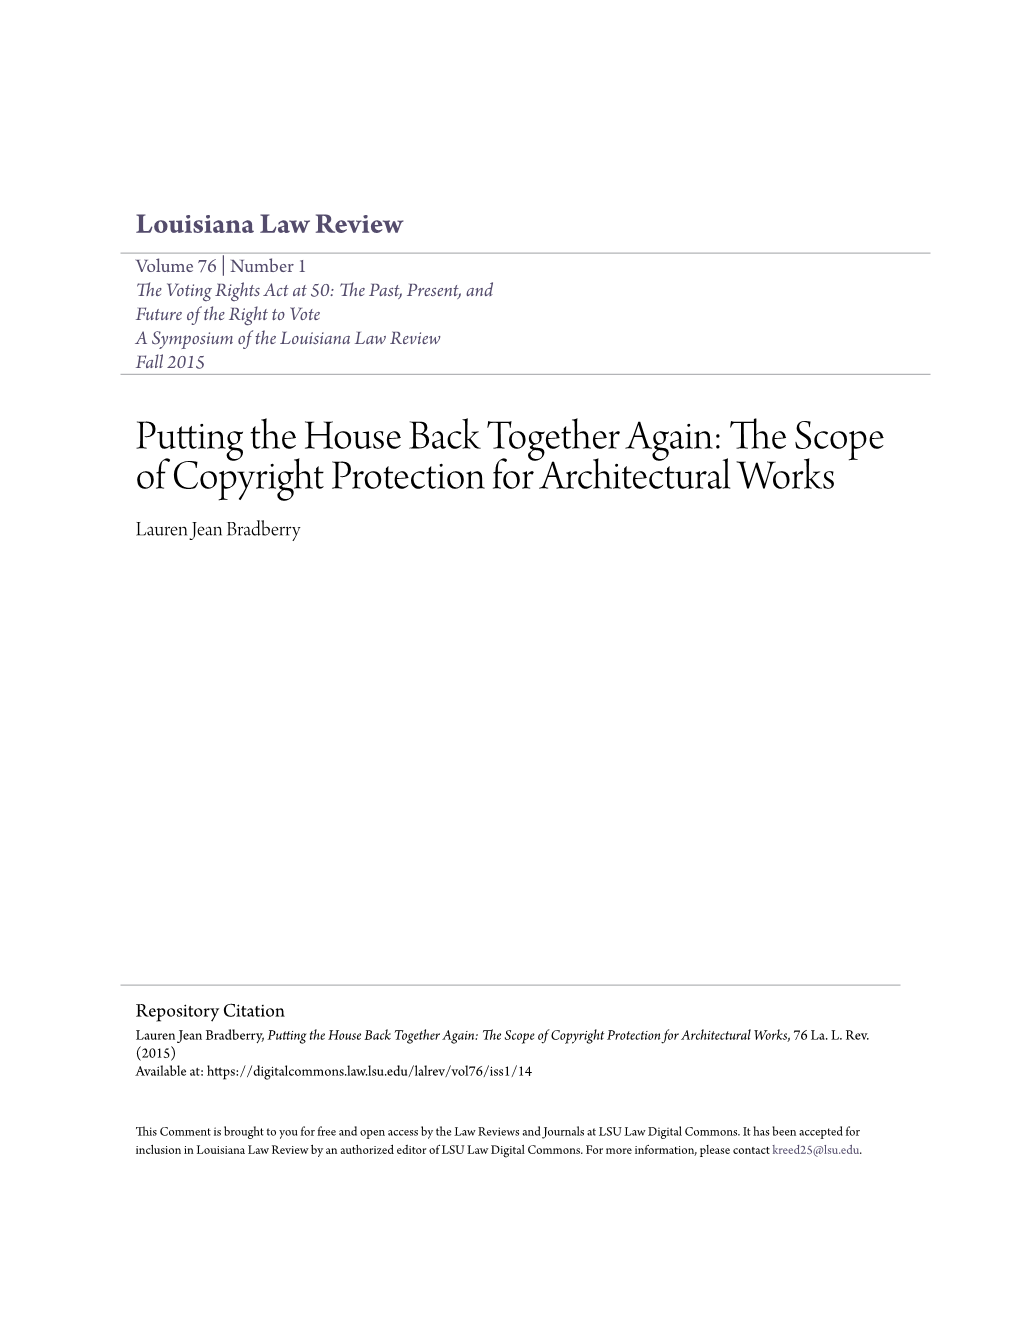 The Scope of Copyright Protection for Architectural Works, 76 La